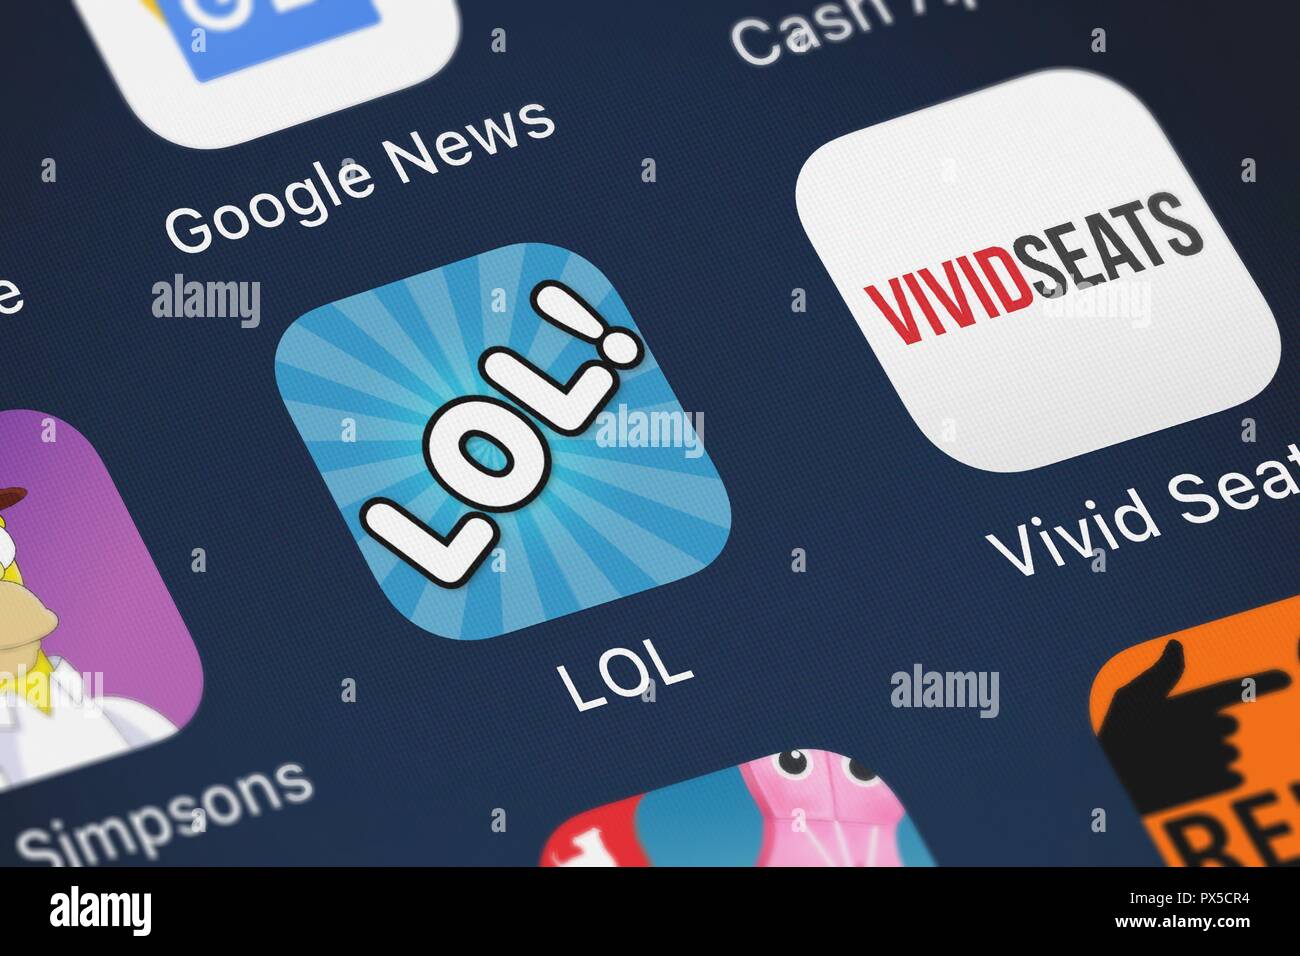 London, United Kingdom - October 19, 2018: Close-up shot of the LOL: Yo' Sista mobile app from Ronald Bell. Stock Photo